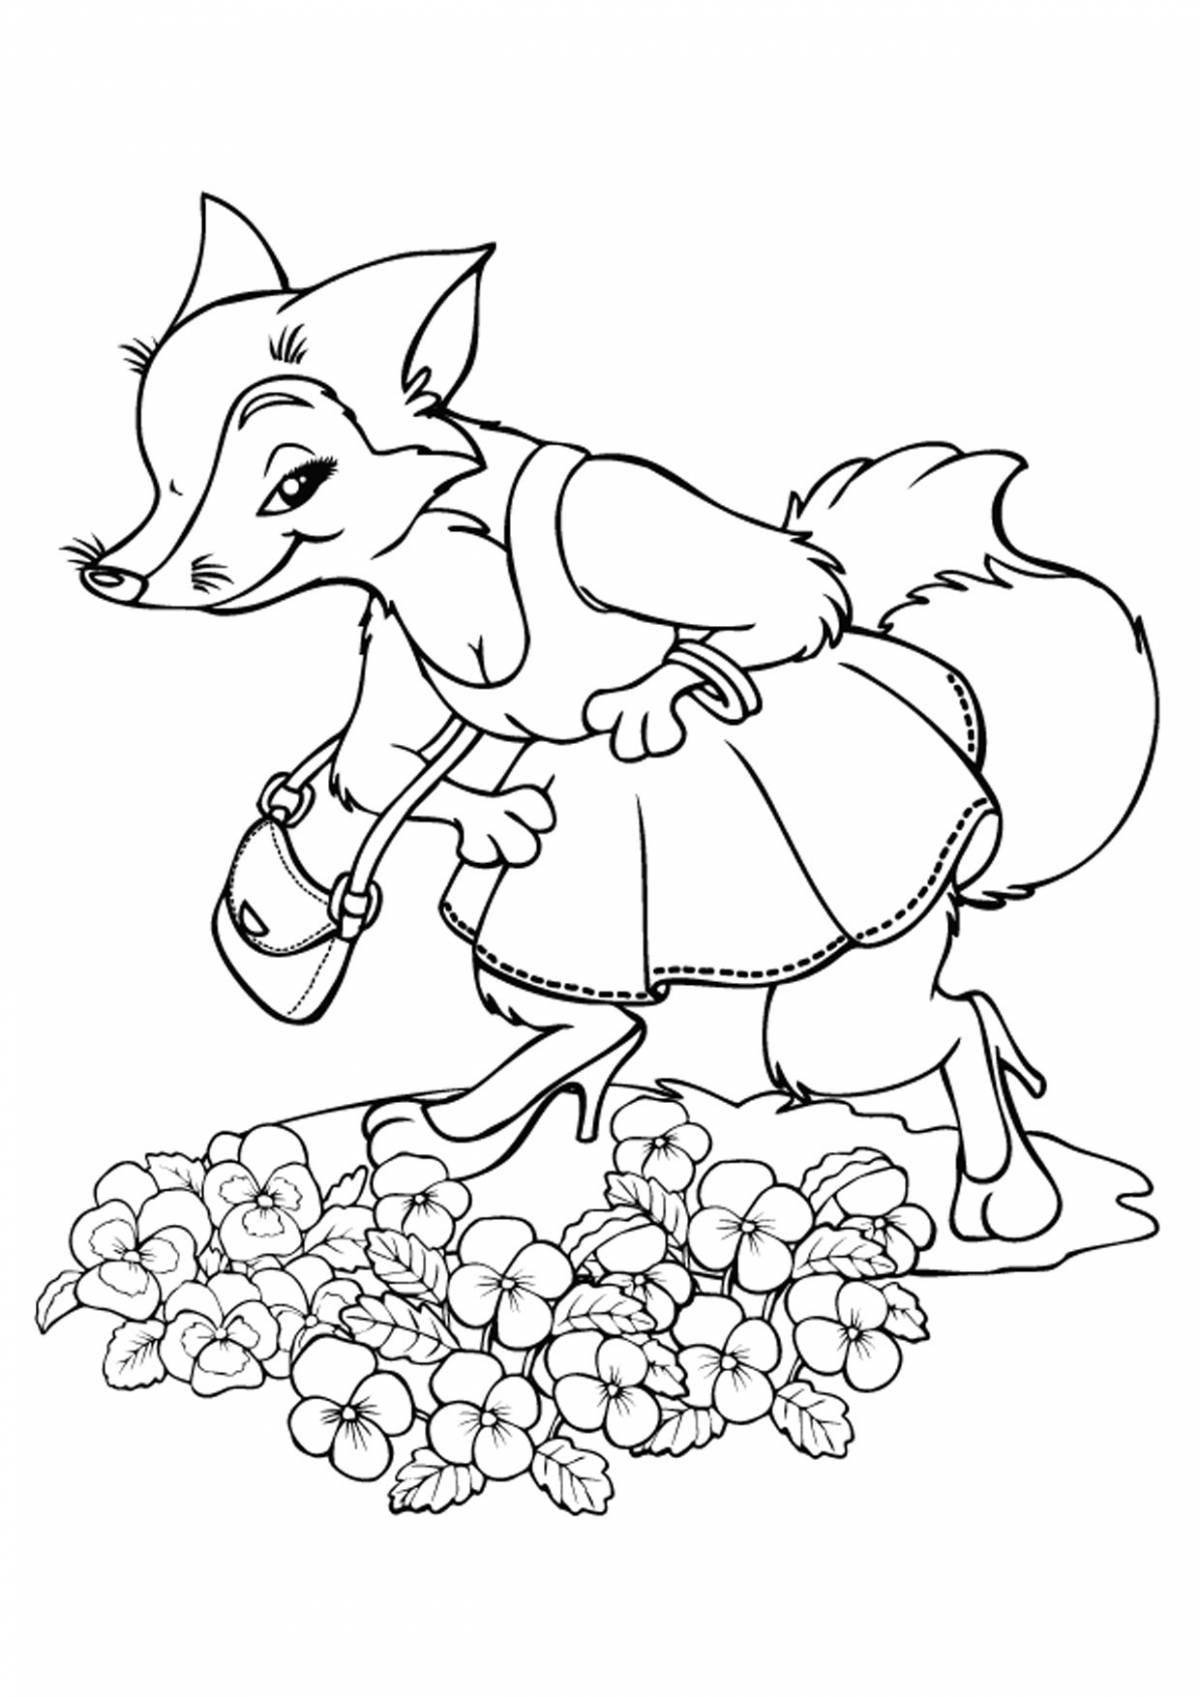 Funny fox coloring book for kids 6-7 years old